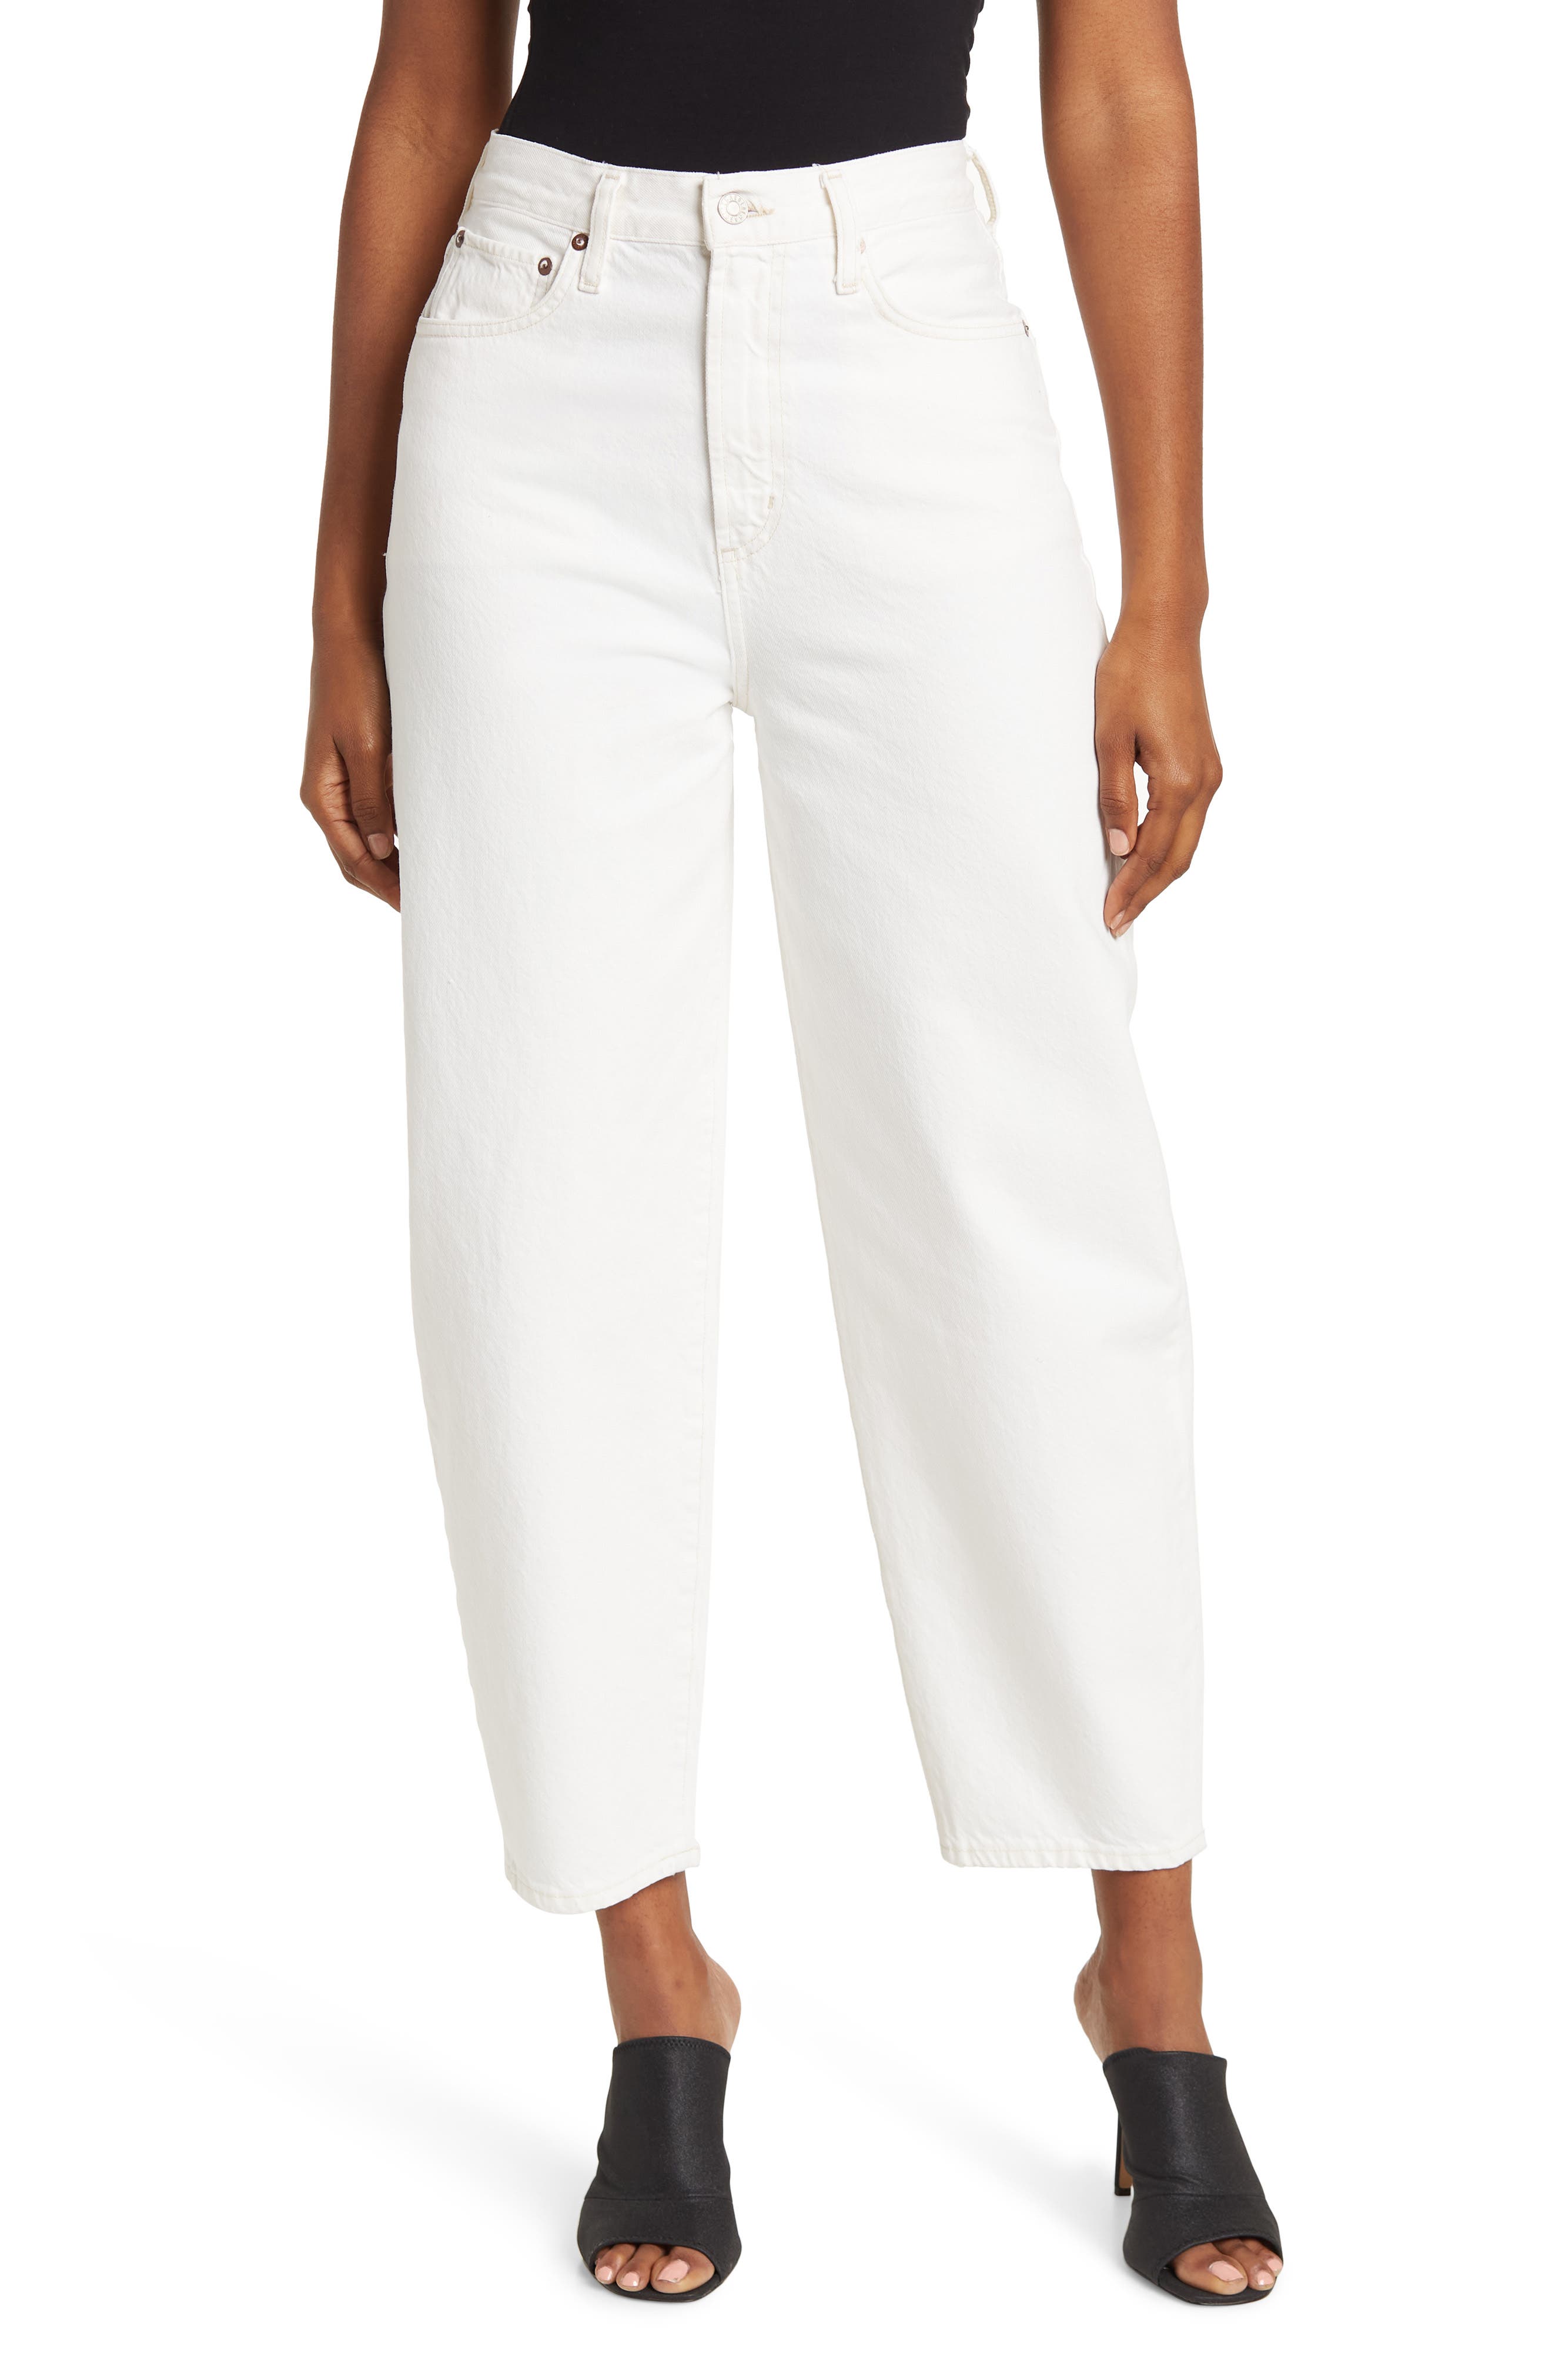 AGOLDE High Waist Organic Cotton Balloon Jeans in Porcelain at Nordstrom, Size 23